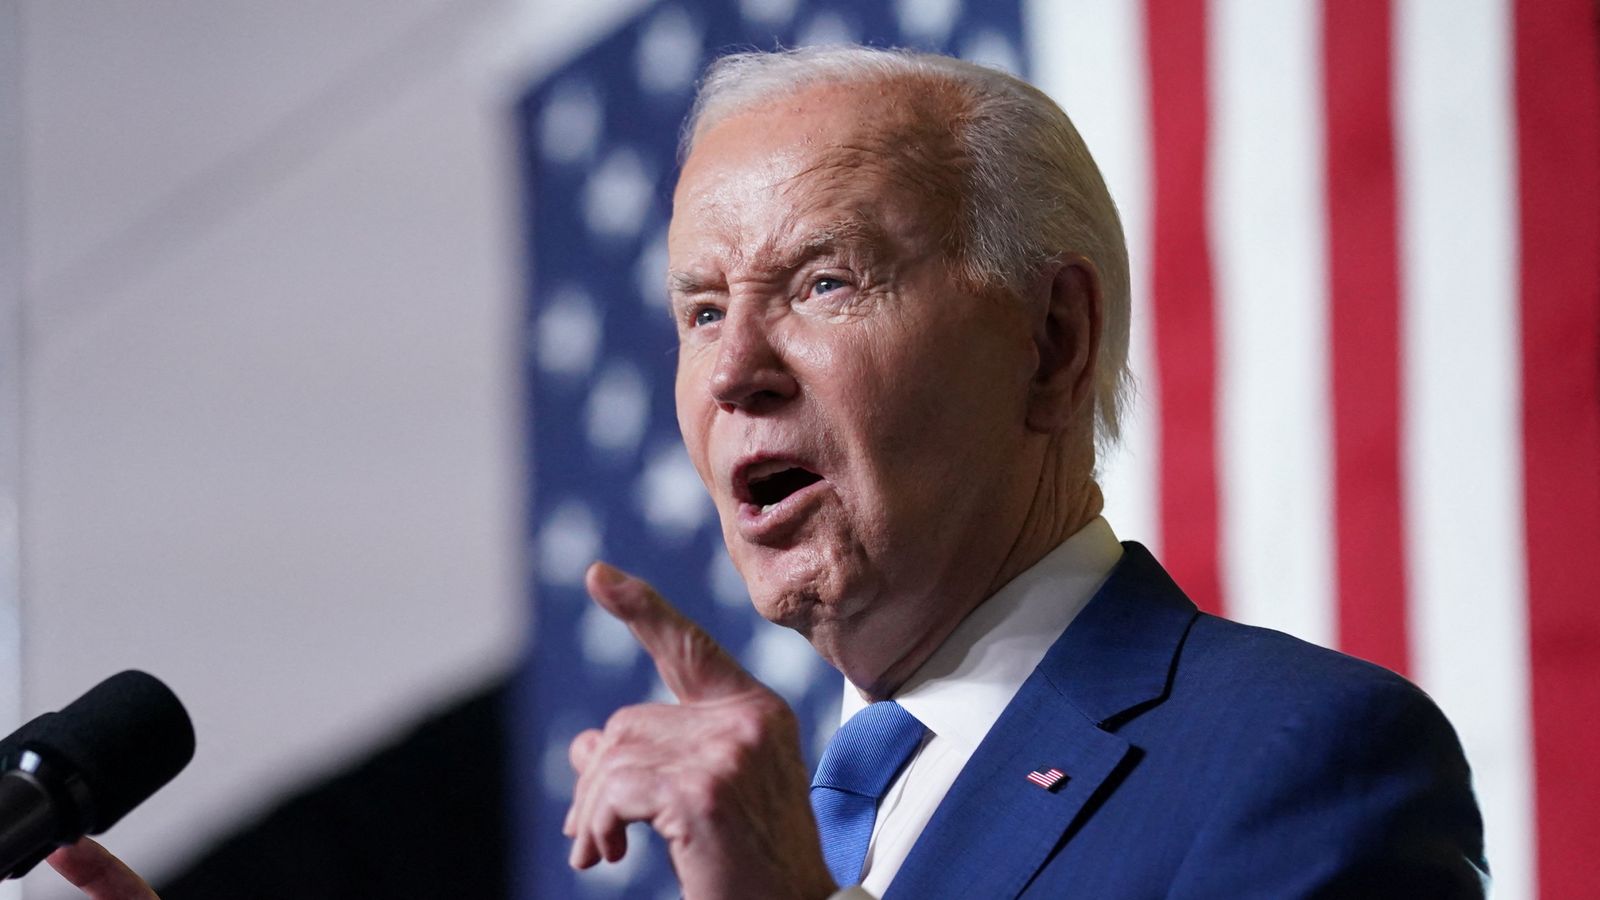 Joe Biden says US will stop some weapons shipments to Israel if it invades Gaza city of Rafah